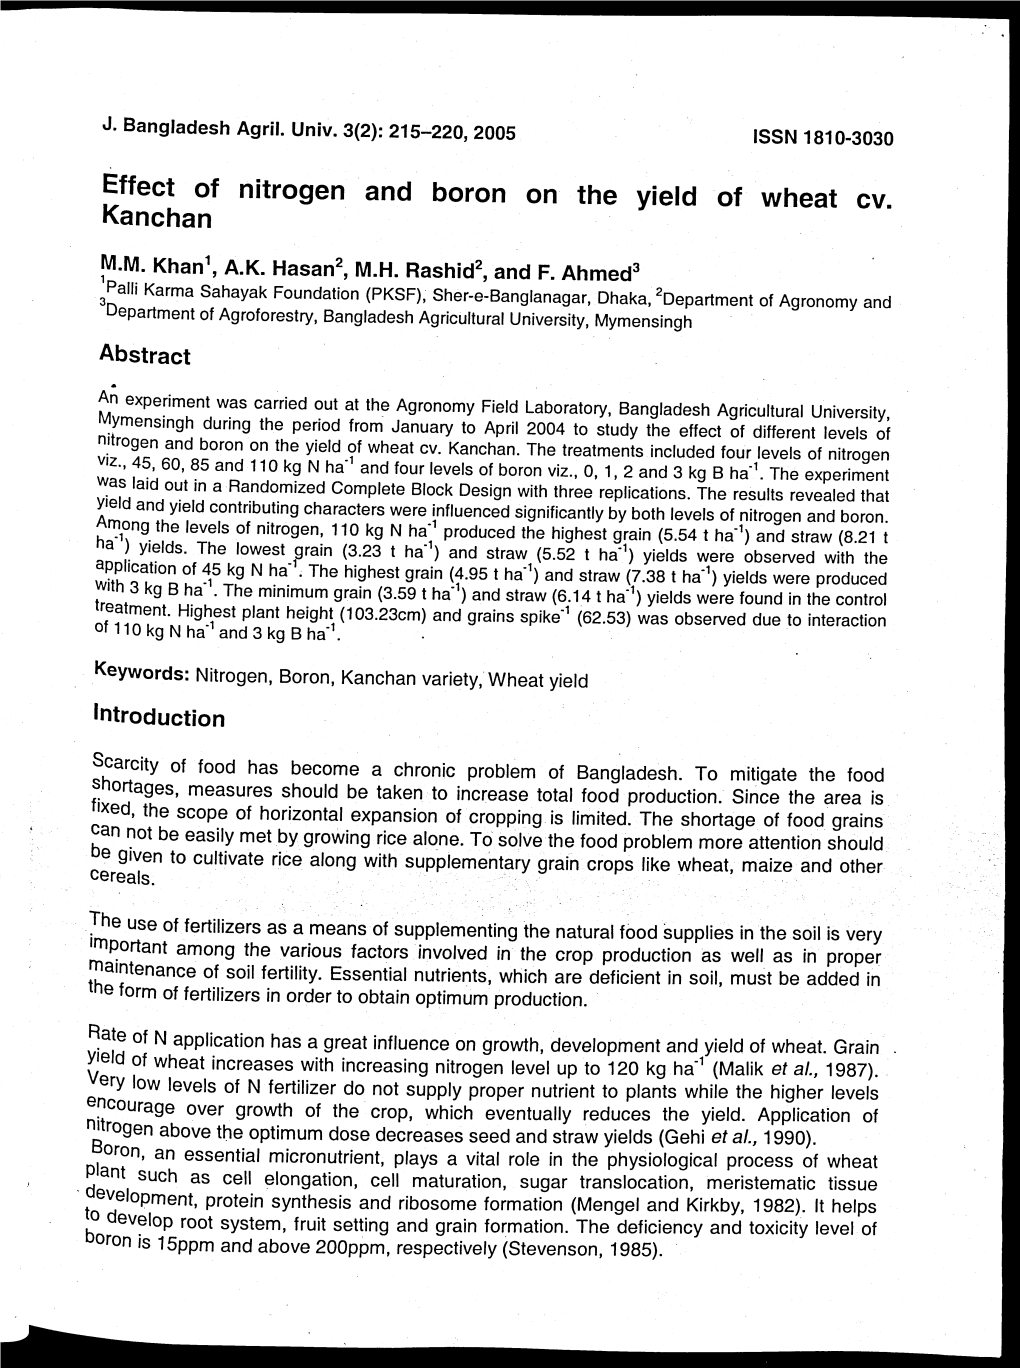 Effect of Nitrogen and Boron on the Yield of Wheat Cv. Kanchan